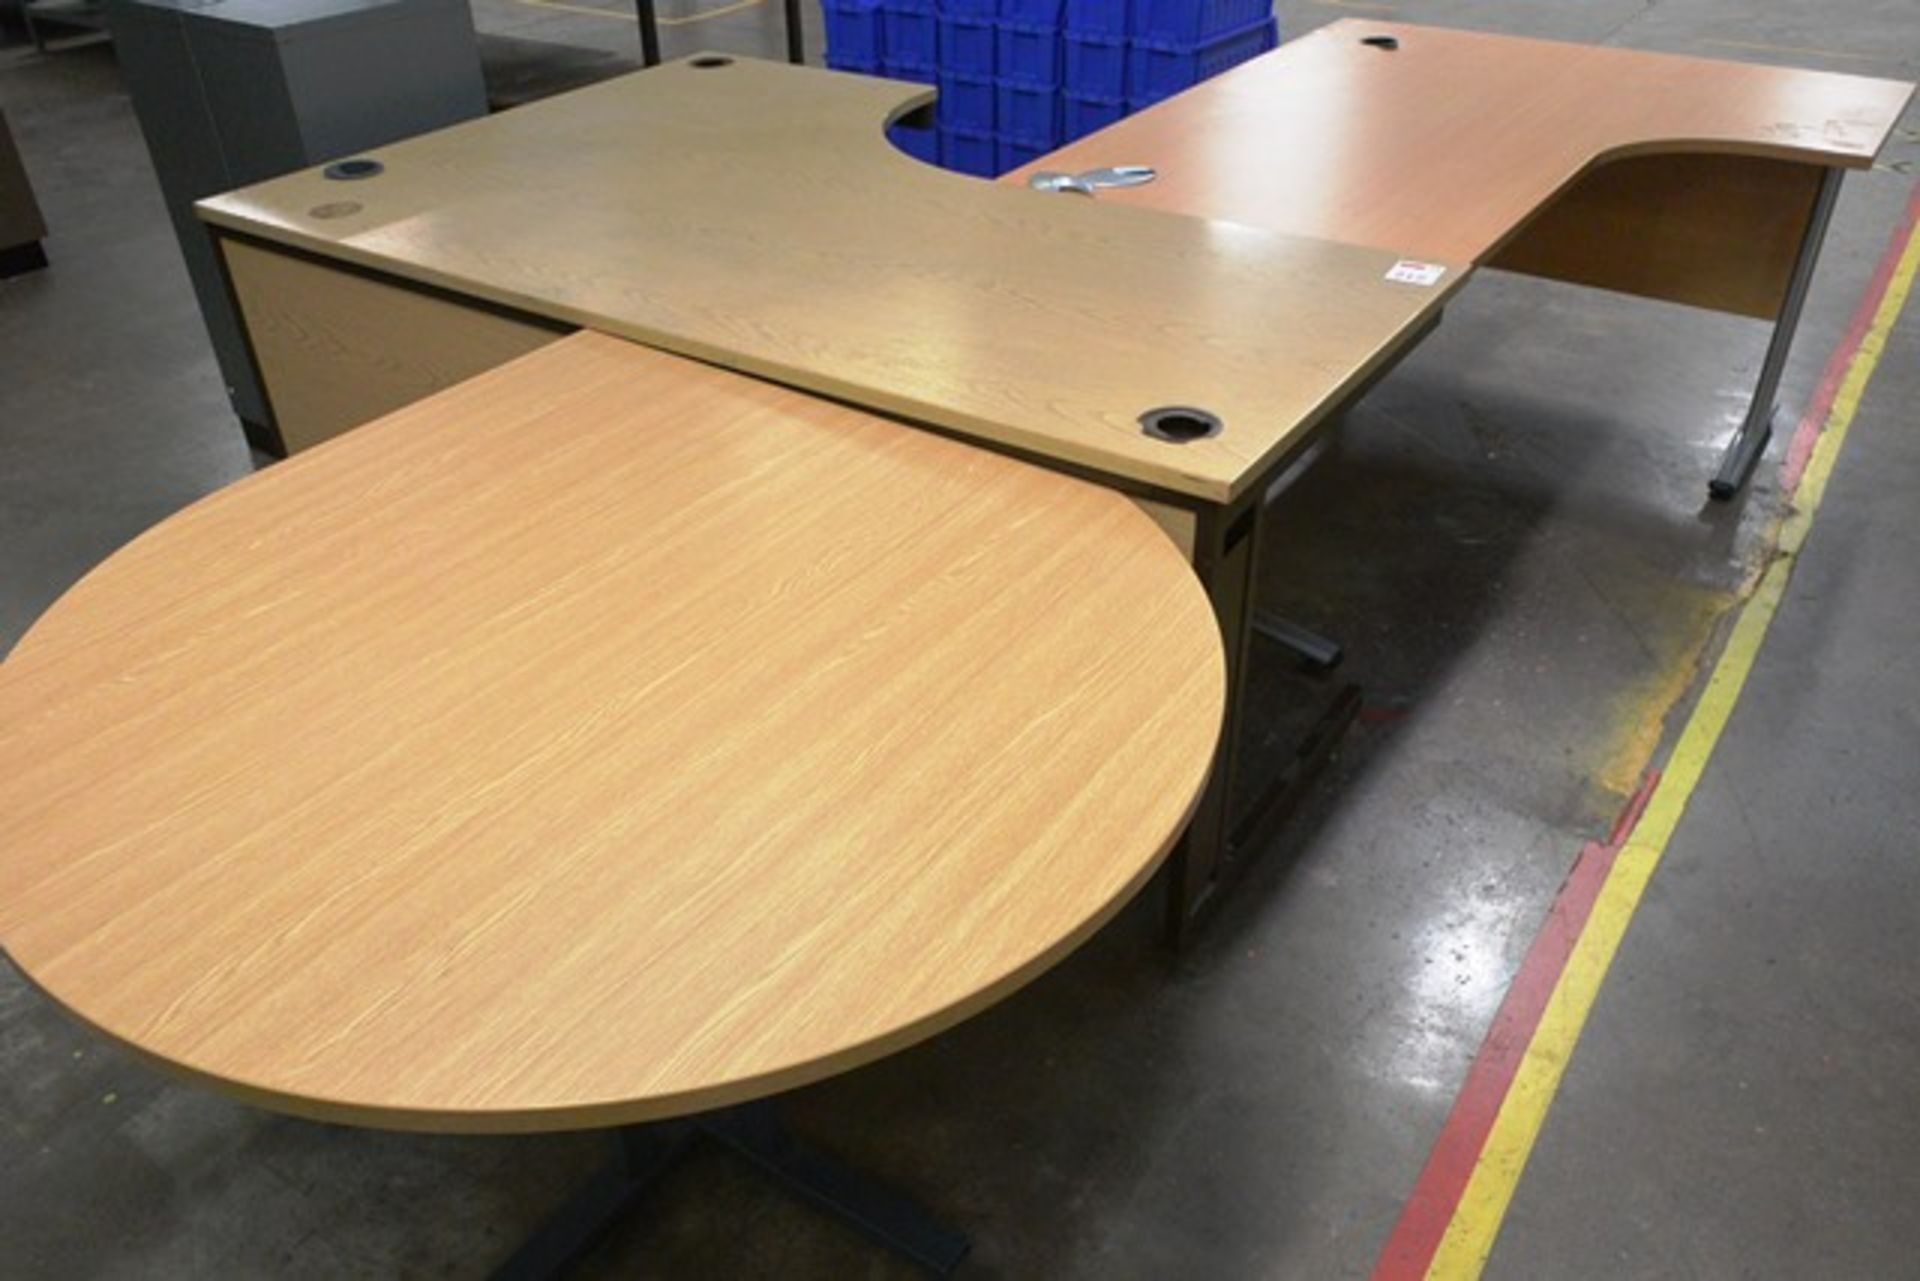 Two various L shape desks and circular side table